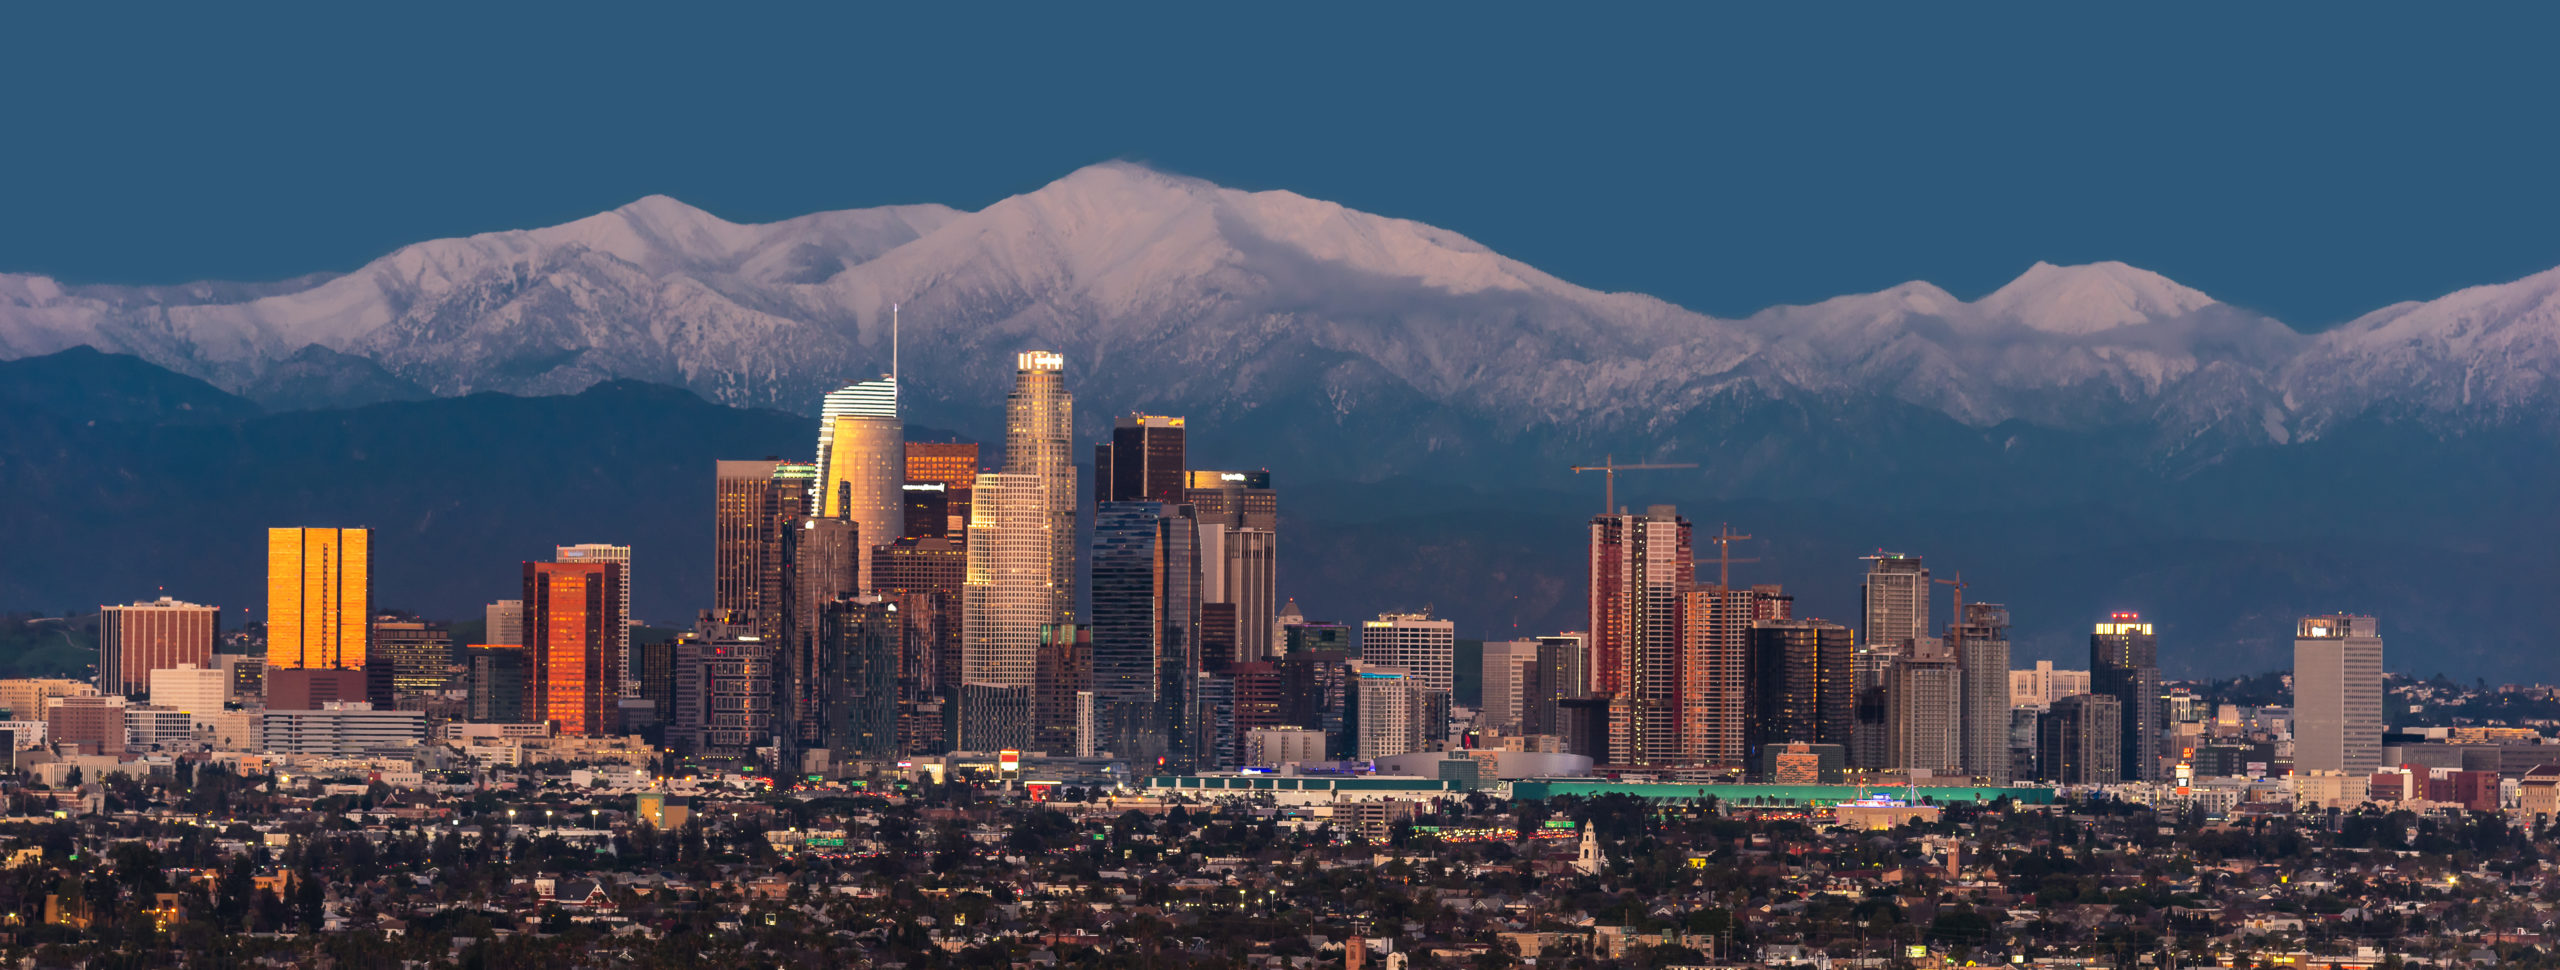 Downtown-Los-Angeles-skyline-with-snow-capped-mountains-behind-at-twilight-scaled